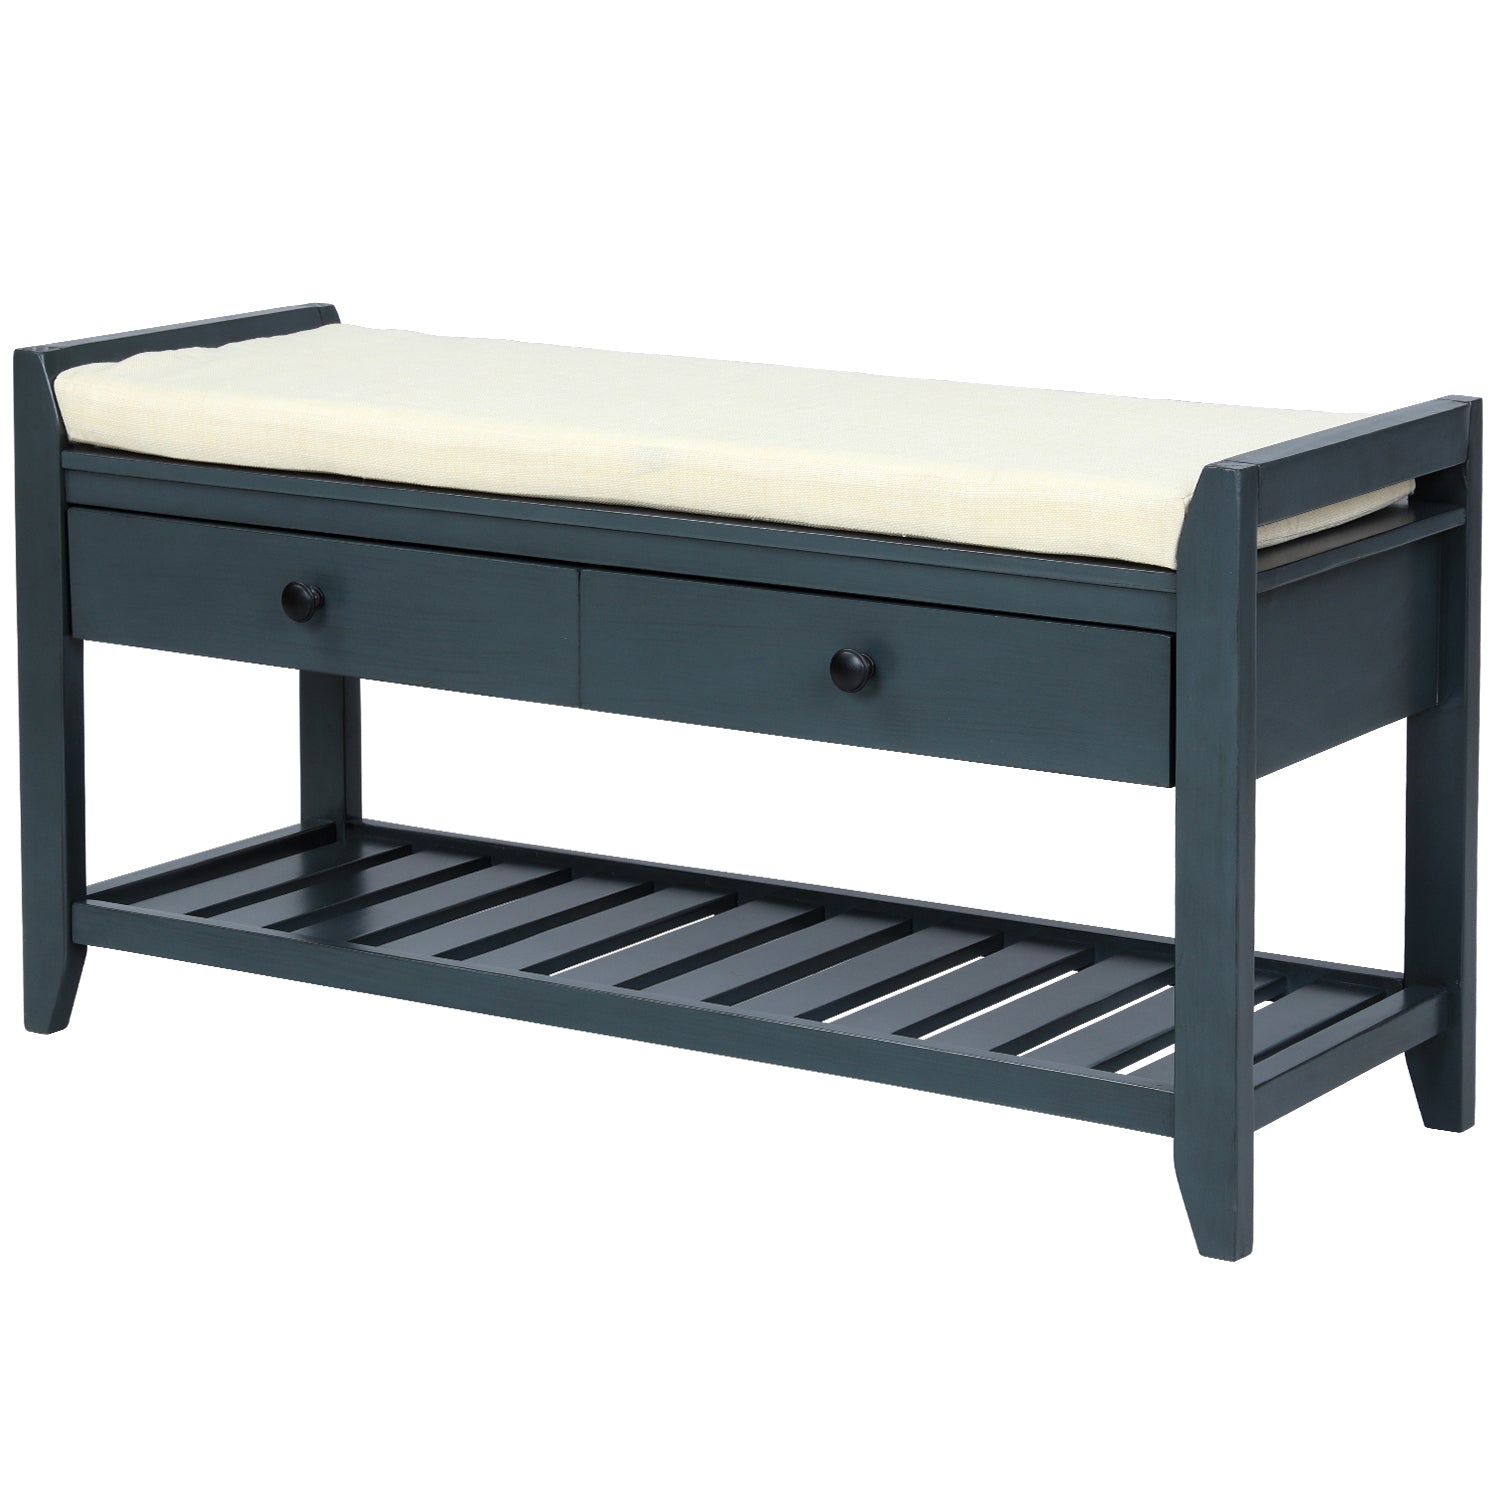 TREXM Shoe Rack with Upholstered Seat (Antique Navy)